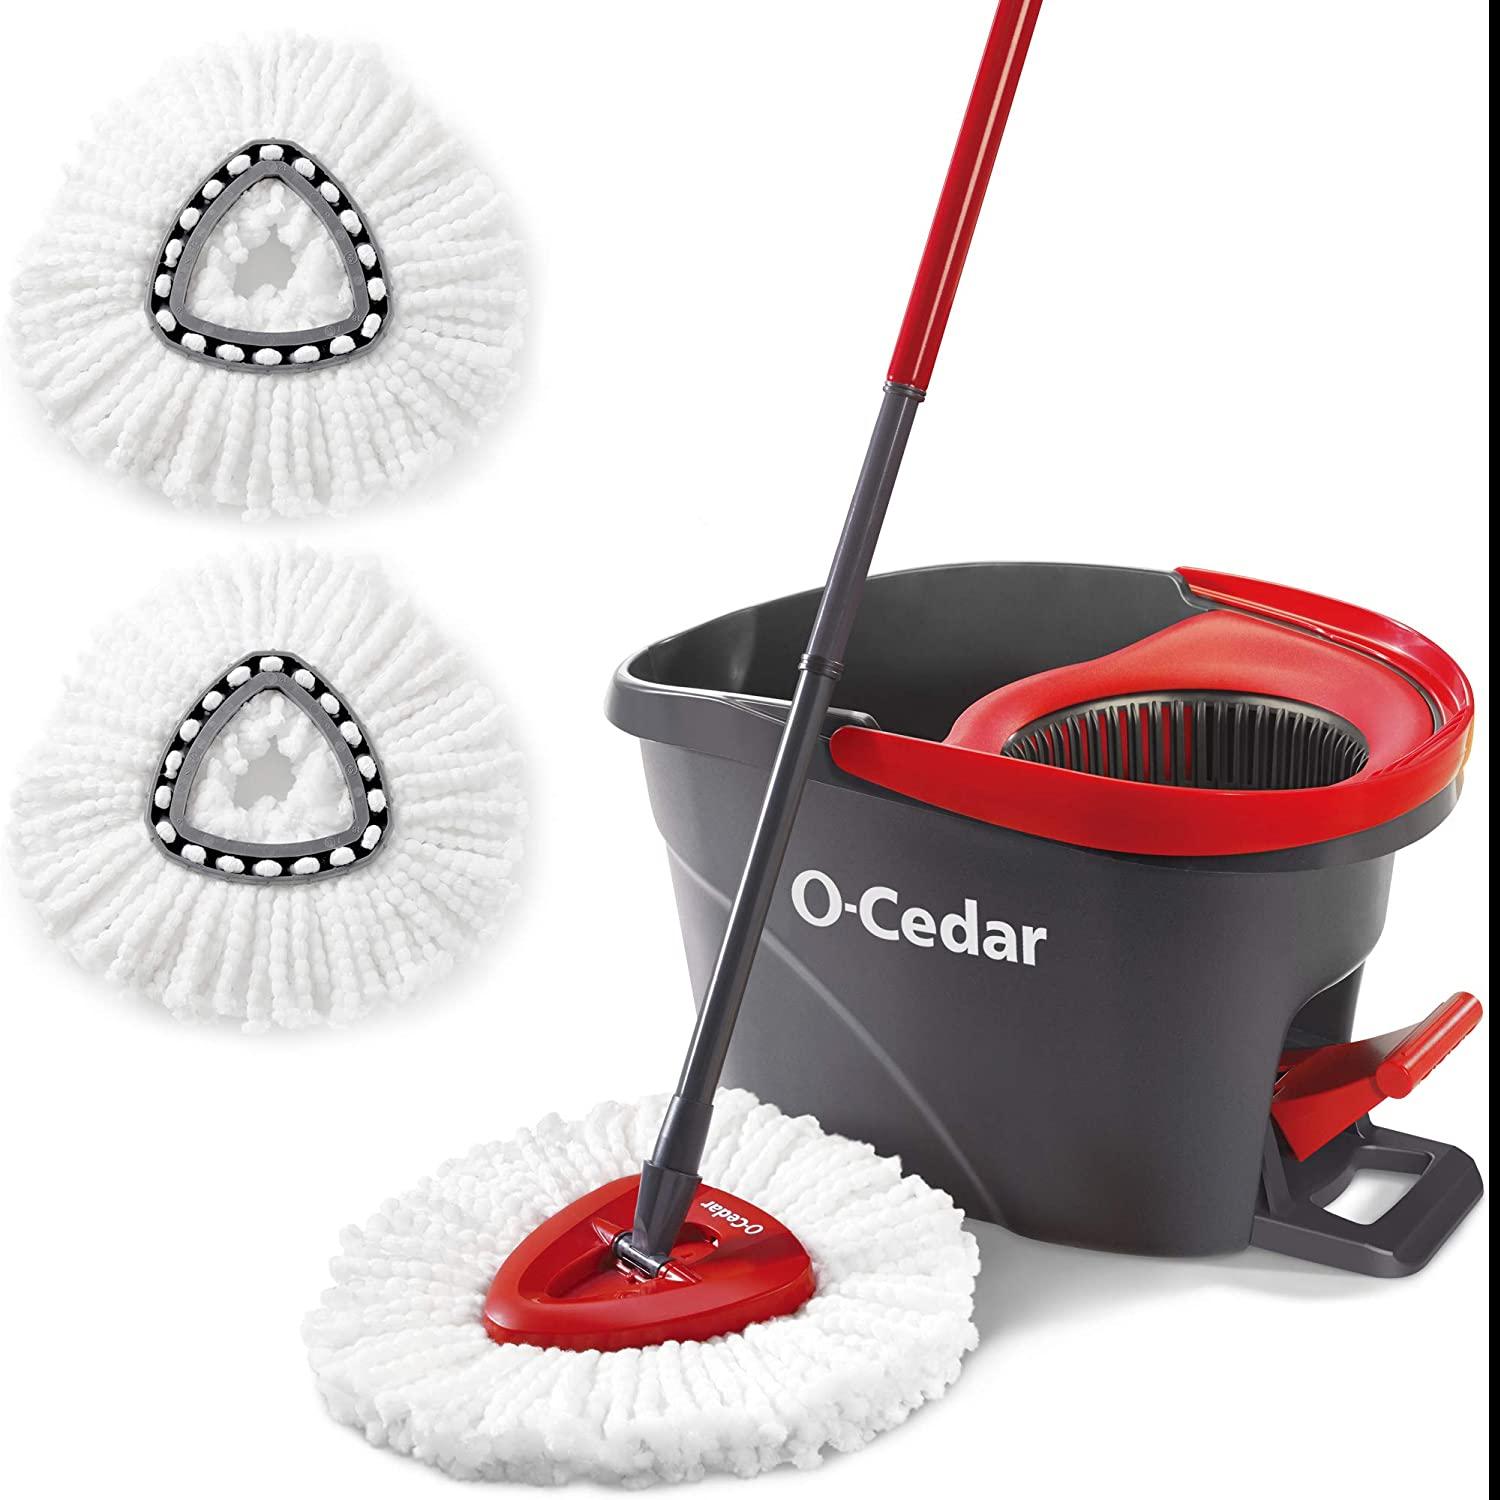 O-Cedar EasyWring Microfiber Spin Mop and Floor Cleaning System for $31.19 SHipped